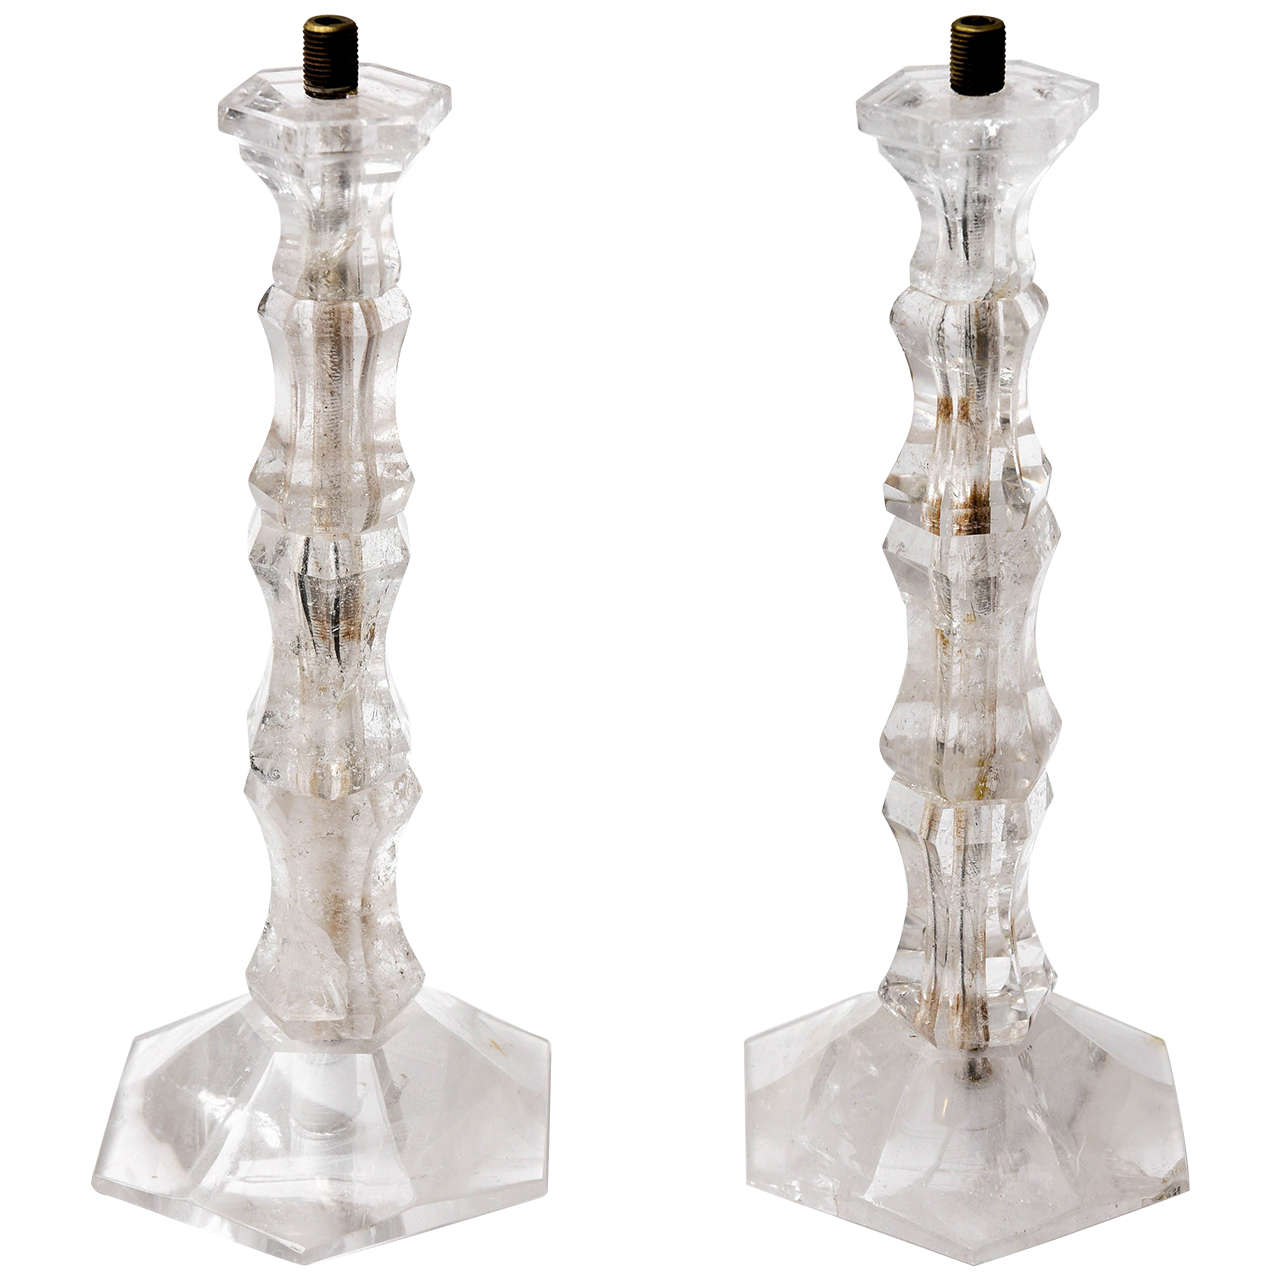 Pair of Rock Crystal Candlesticks Art Deco Period France 